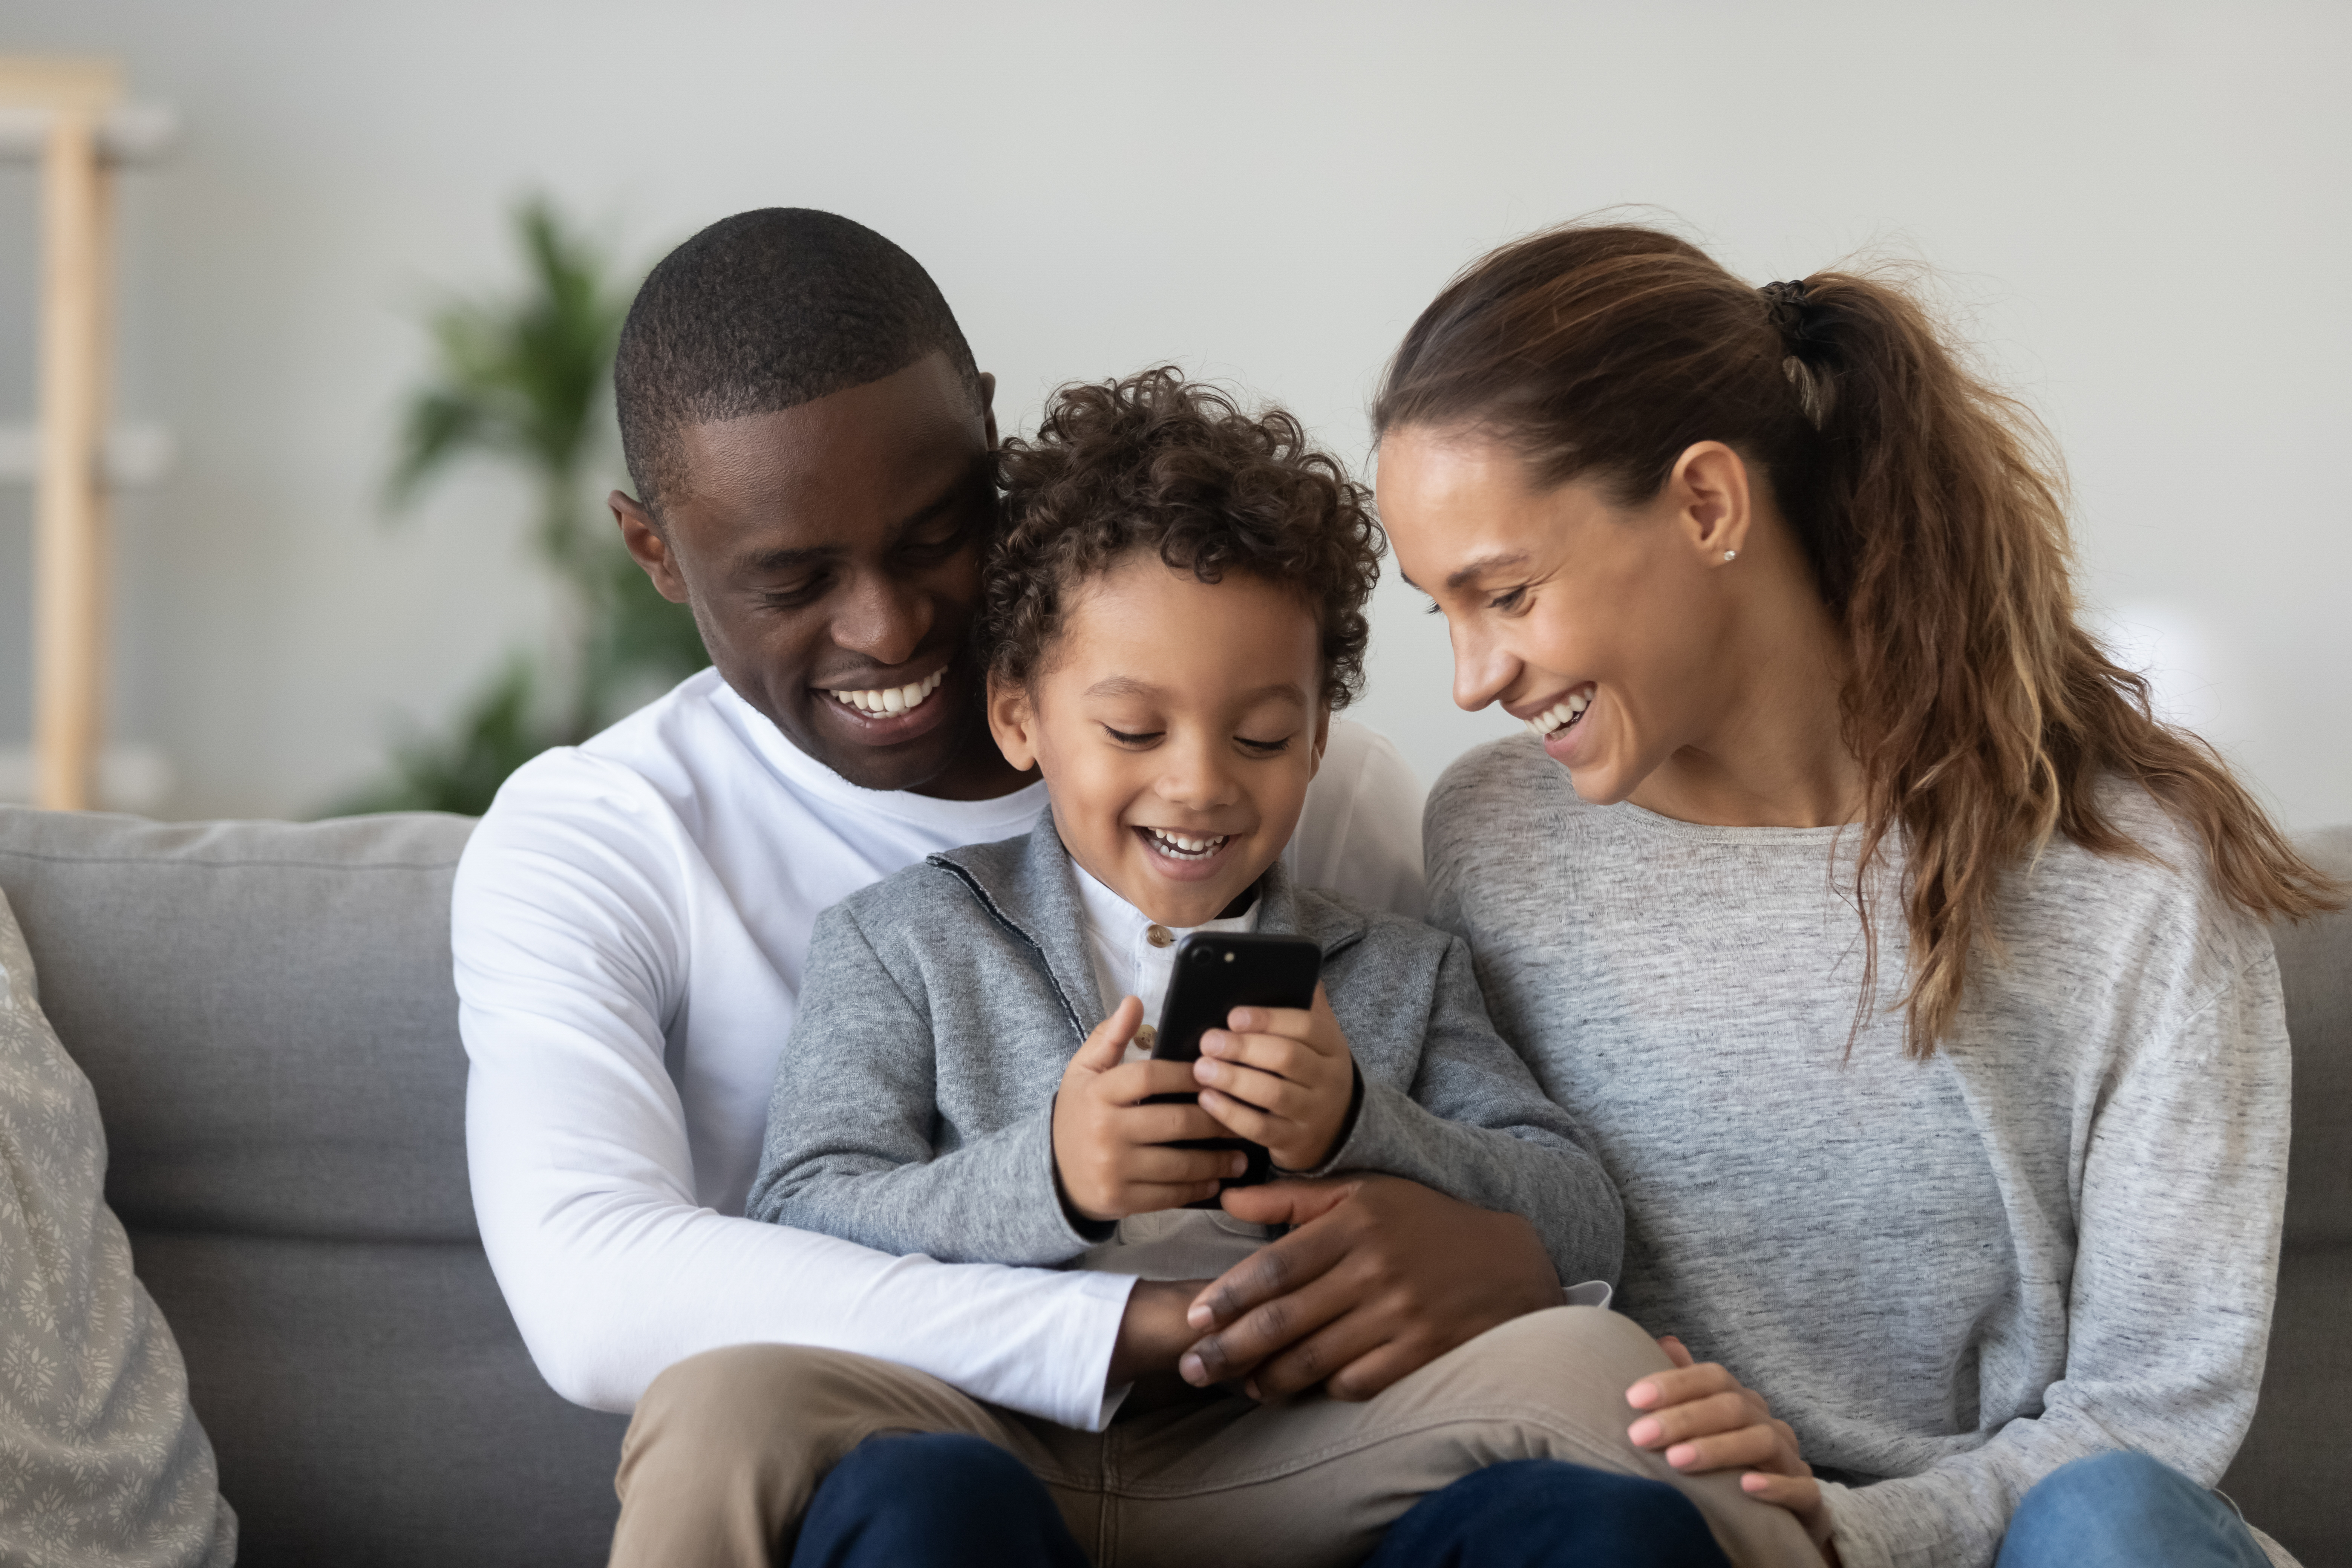 A mixed-race couple is pictured having fun with their little son at home | Source: Shutterstock